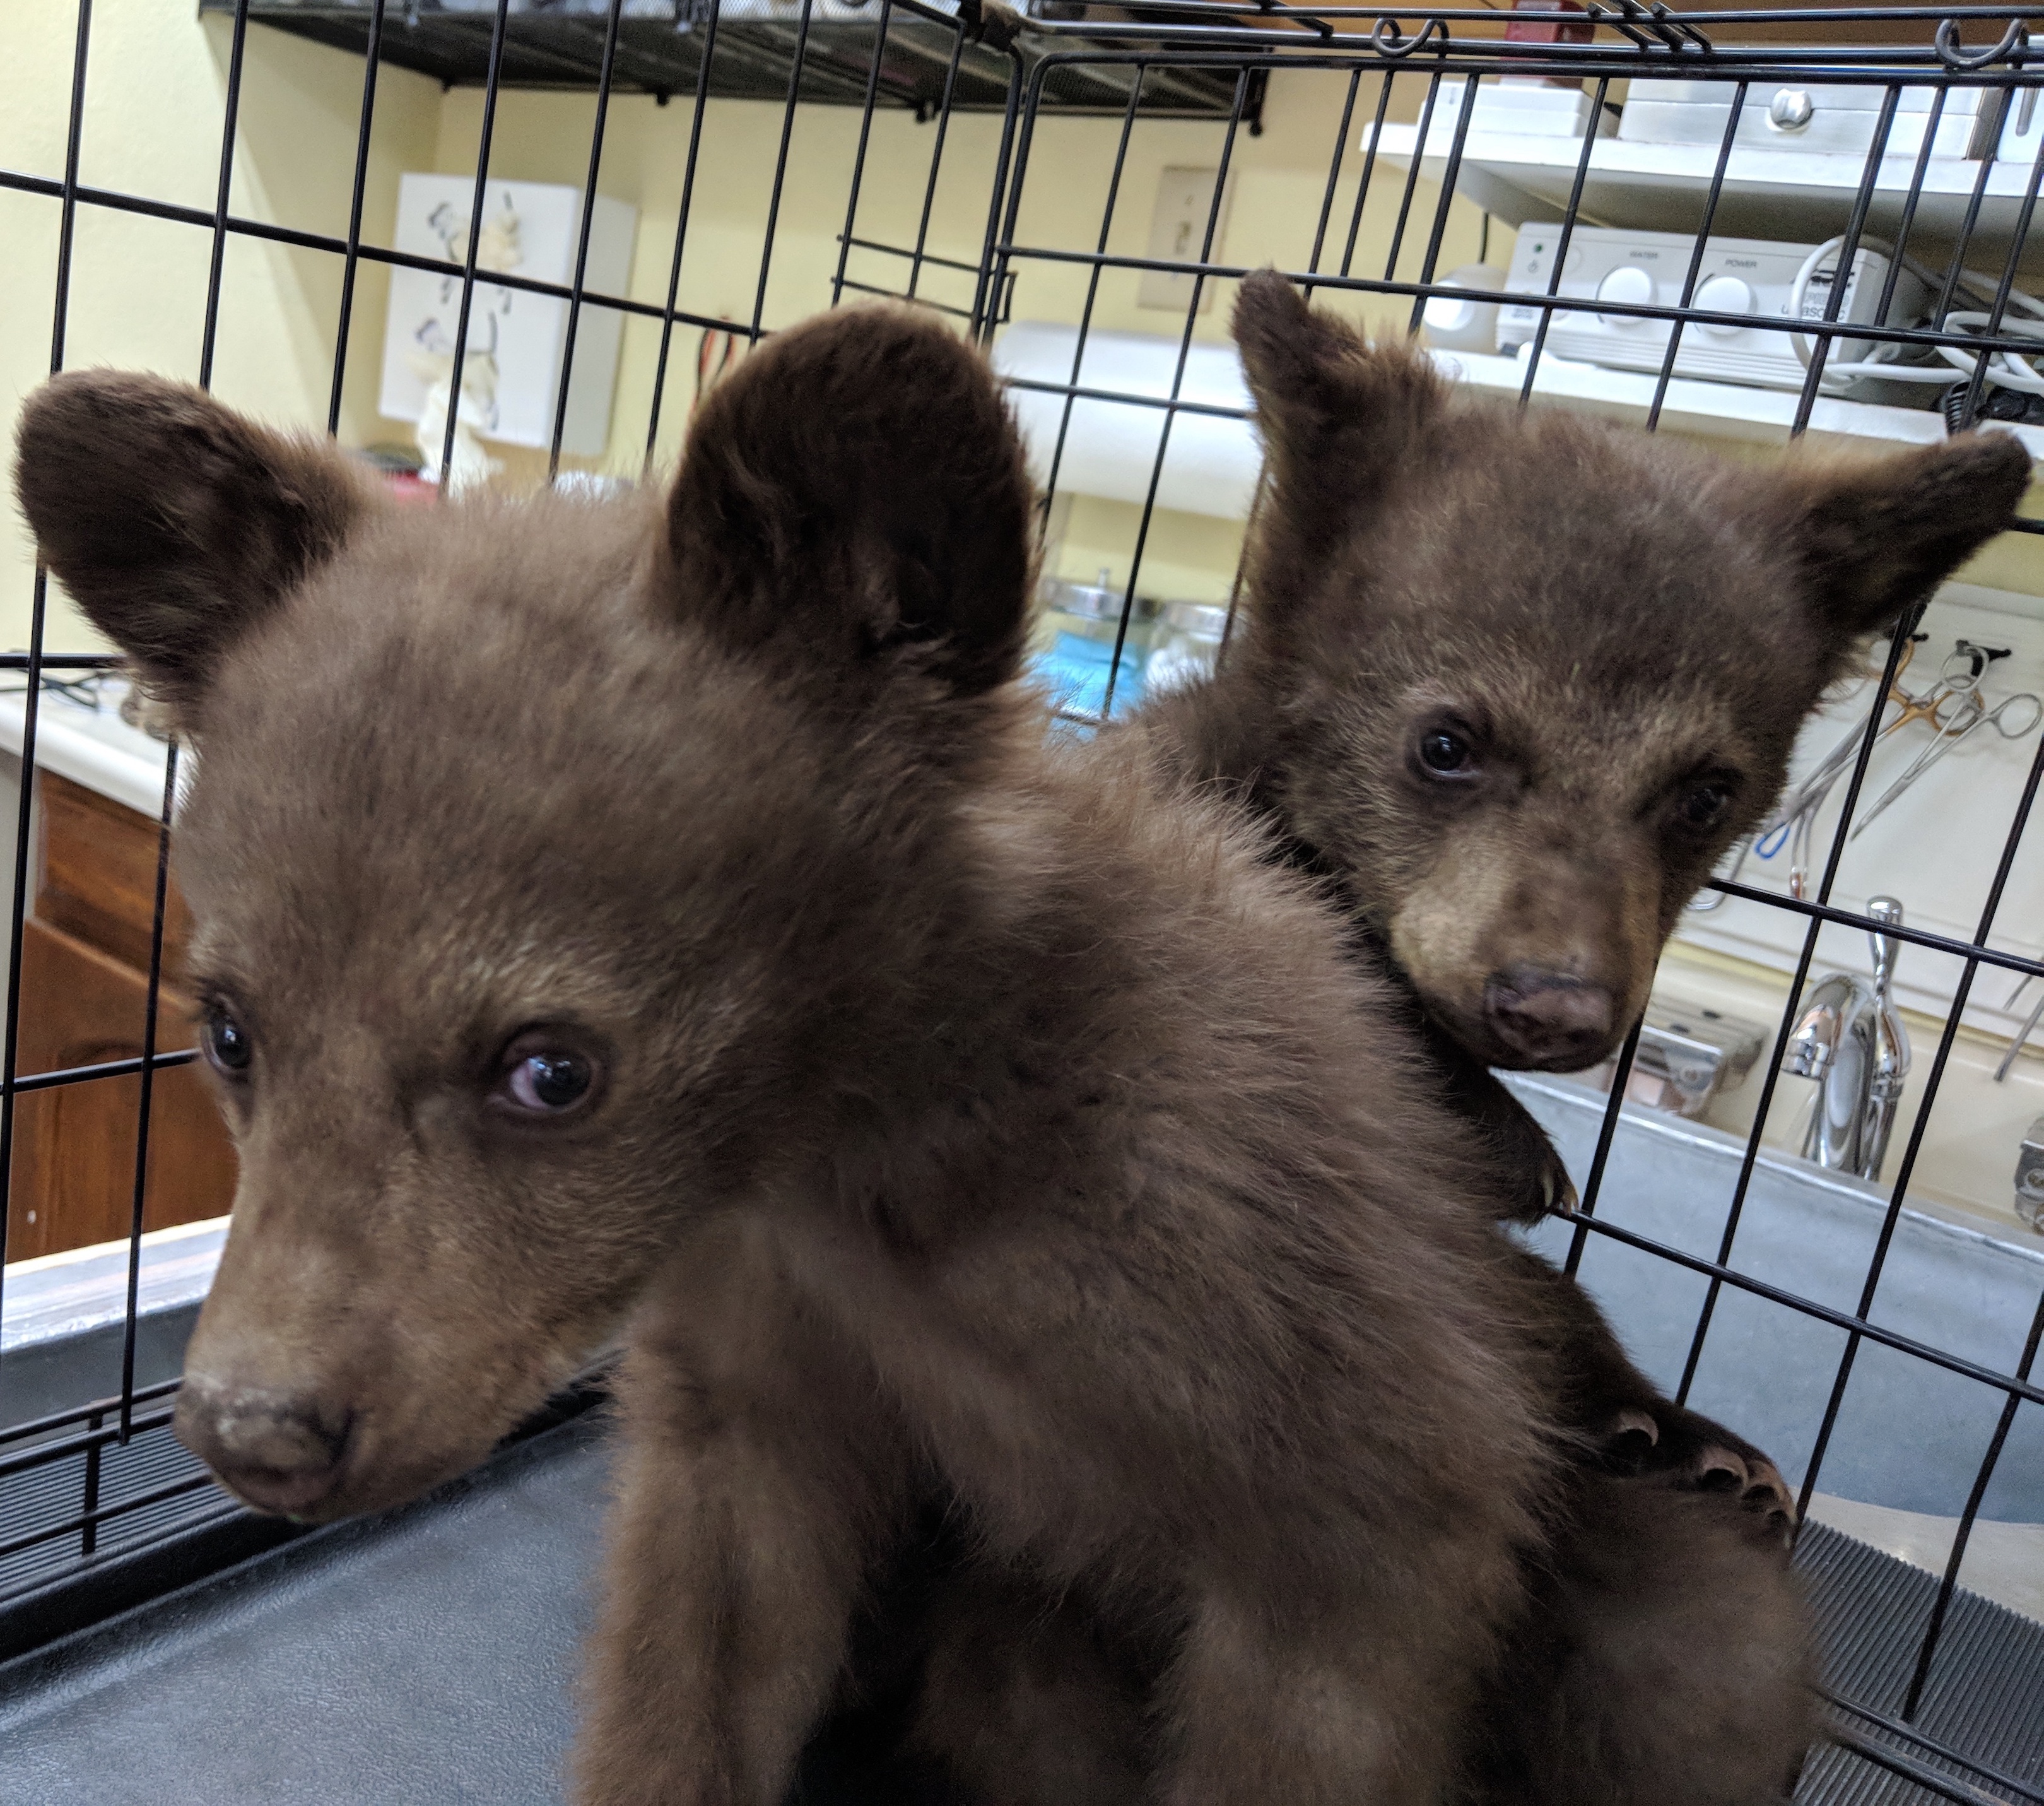 Bearizona rescued four bear cubs left without a mom last year and here are two of them getting checked out by a veterinarian.